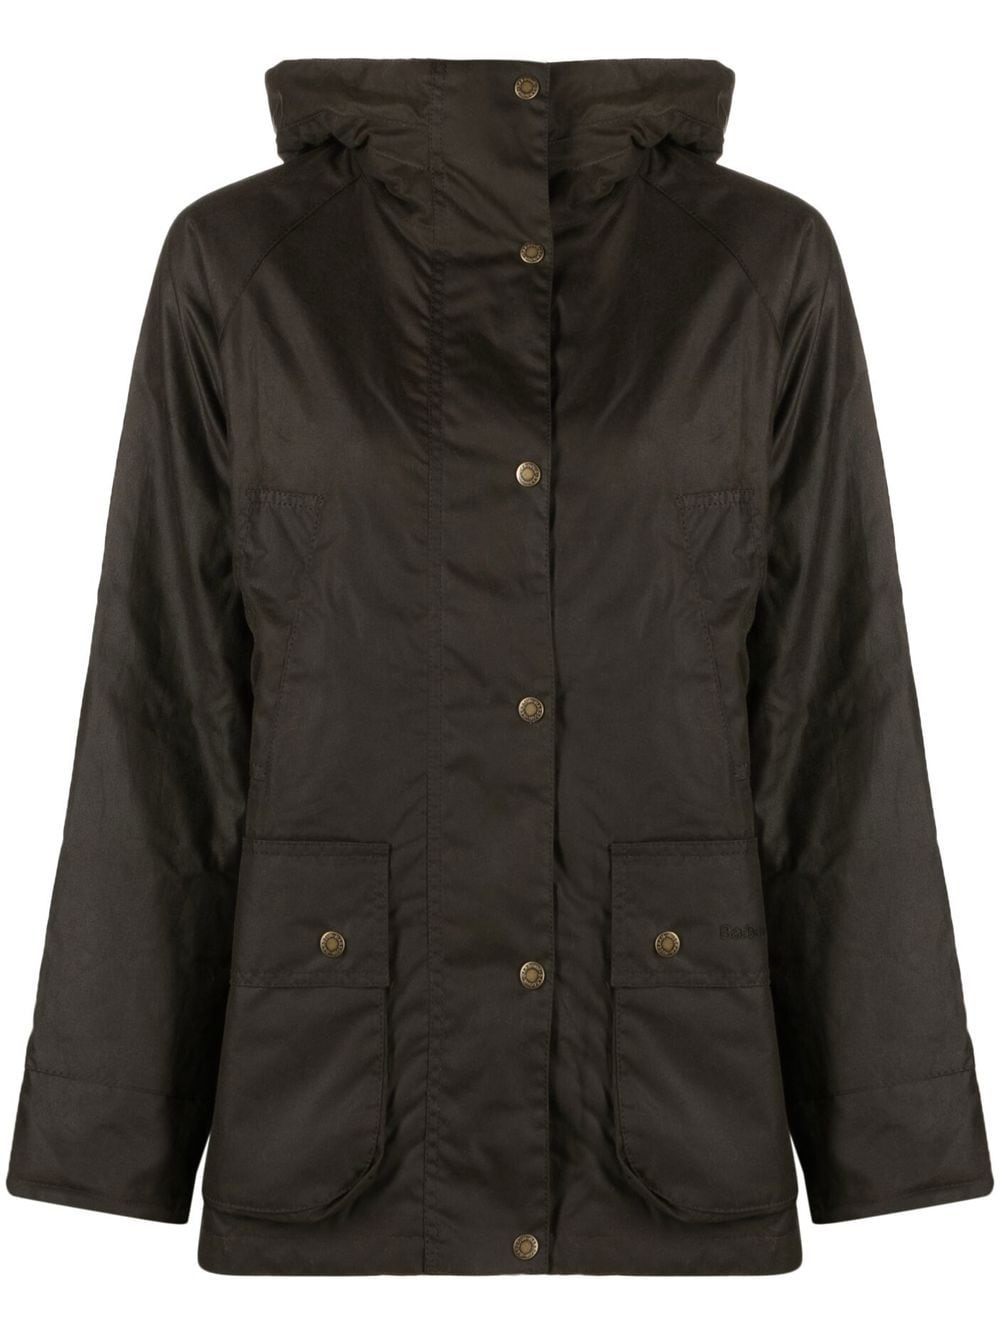 Barbour button-up hooded jacket - Green von Barbour